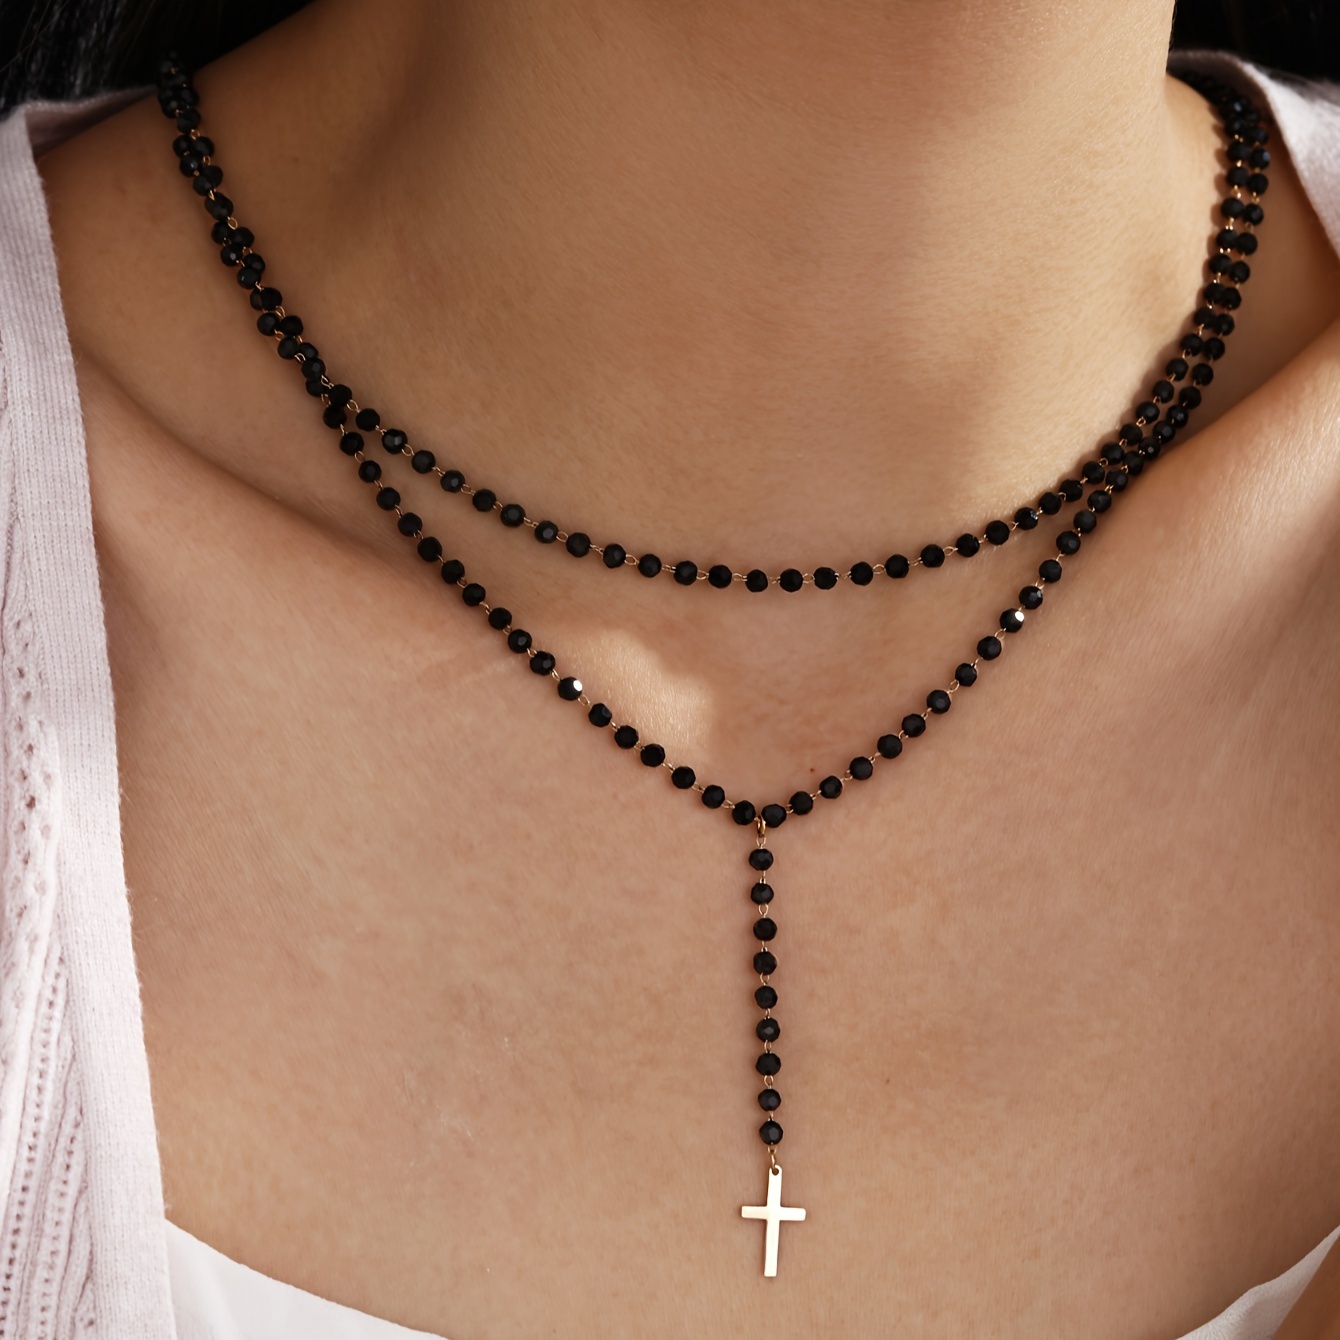 

Gothic Stainless Steel Cross Charm Necklace Suitable For Women's Daily Accessories